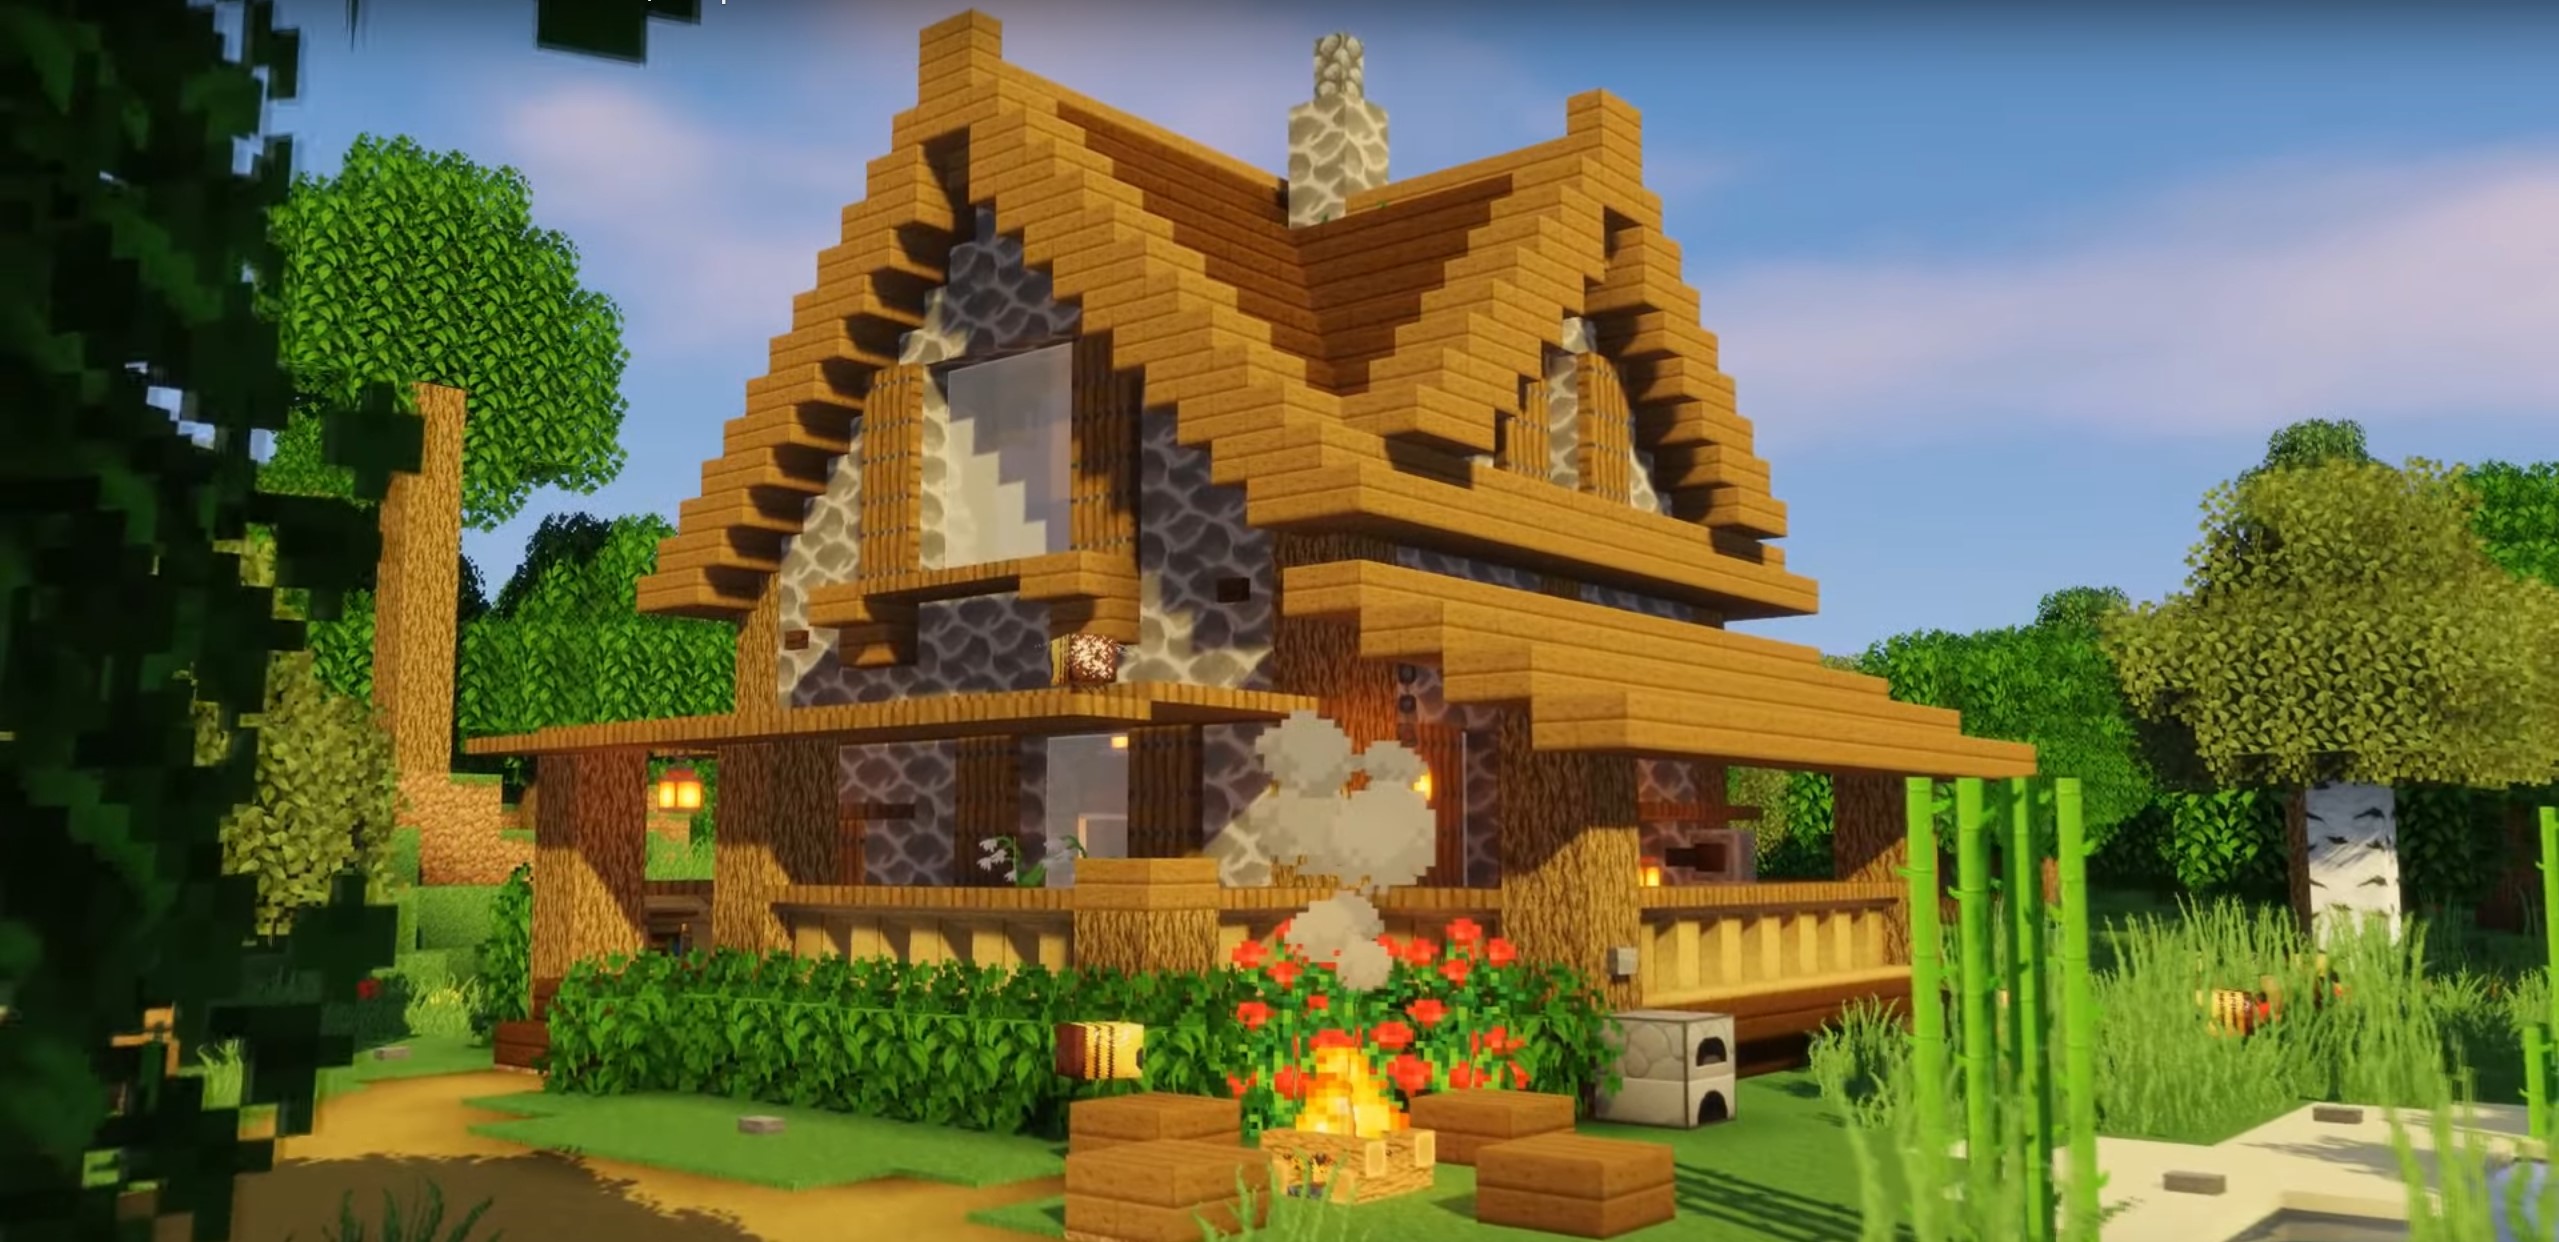 Minecraft Simple Wooden House with a garden idea